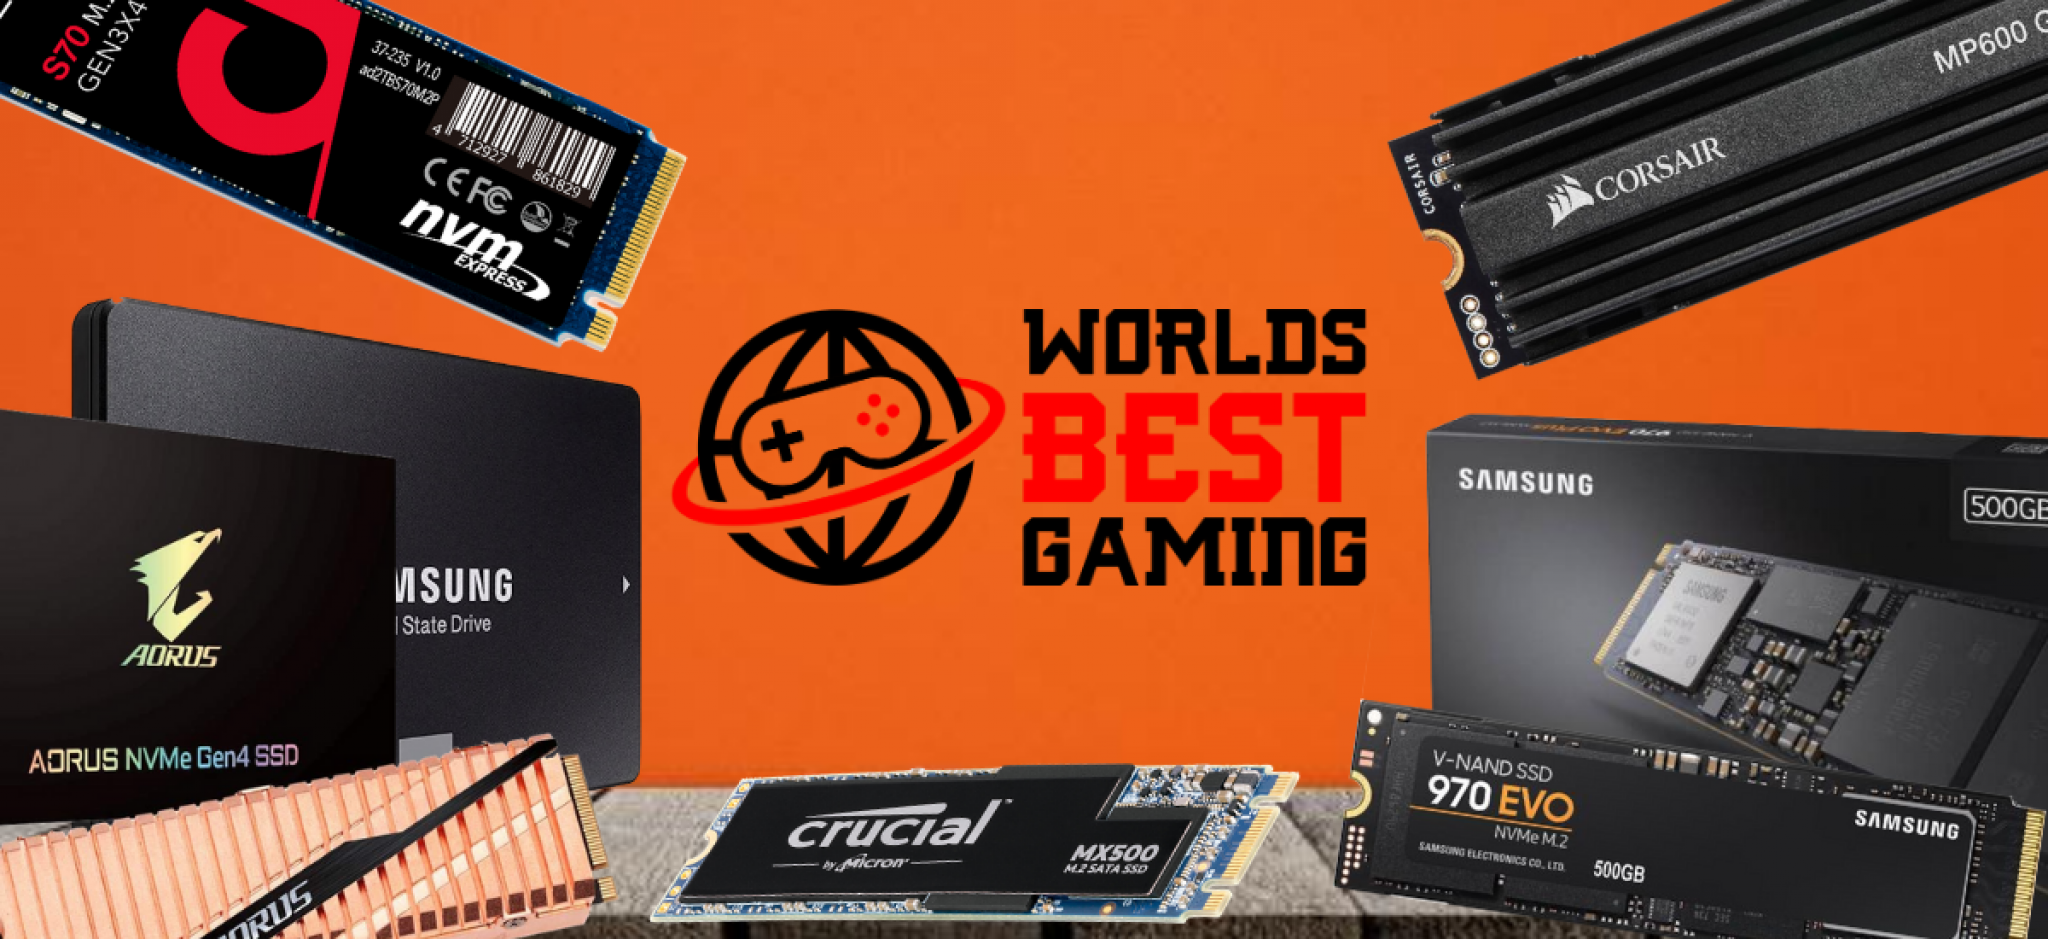 Best SSD’s of 2021 Worlds Best Gaming